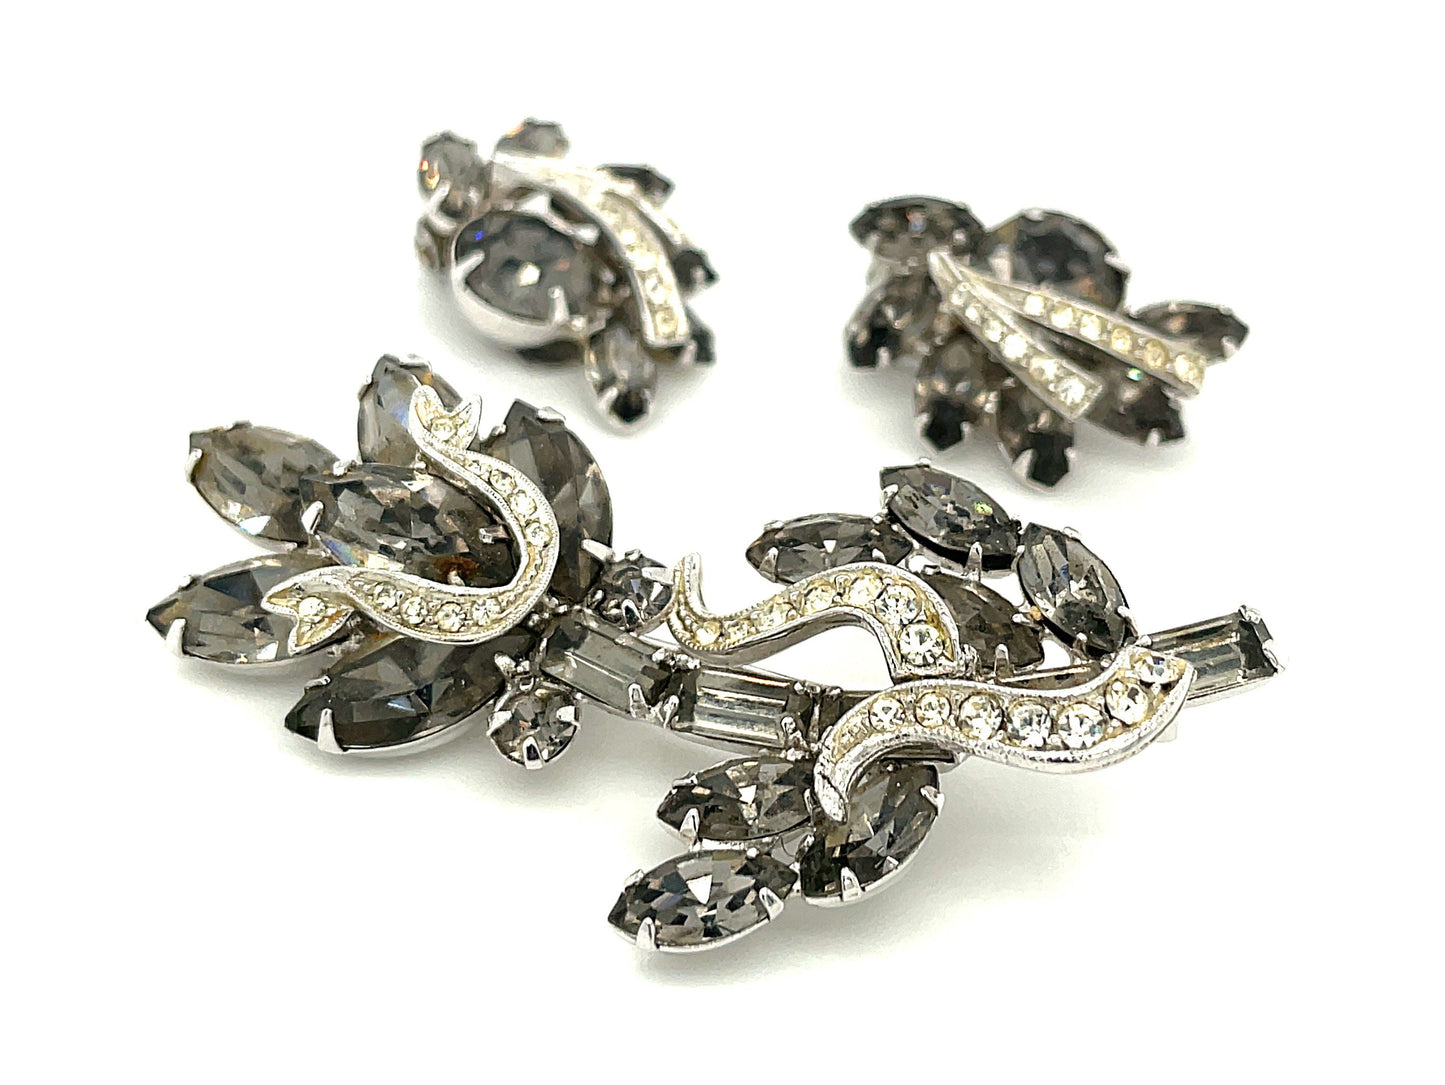 Vintage Weiss Signed Brooch and Earrings Rhinestones and Crystal